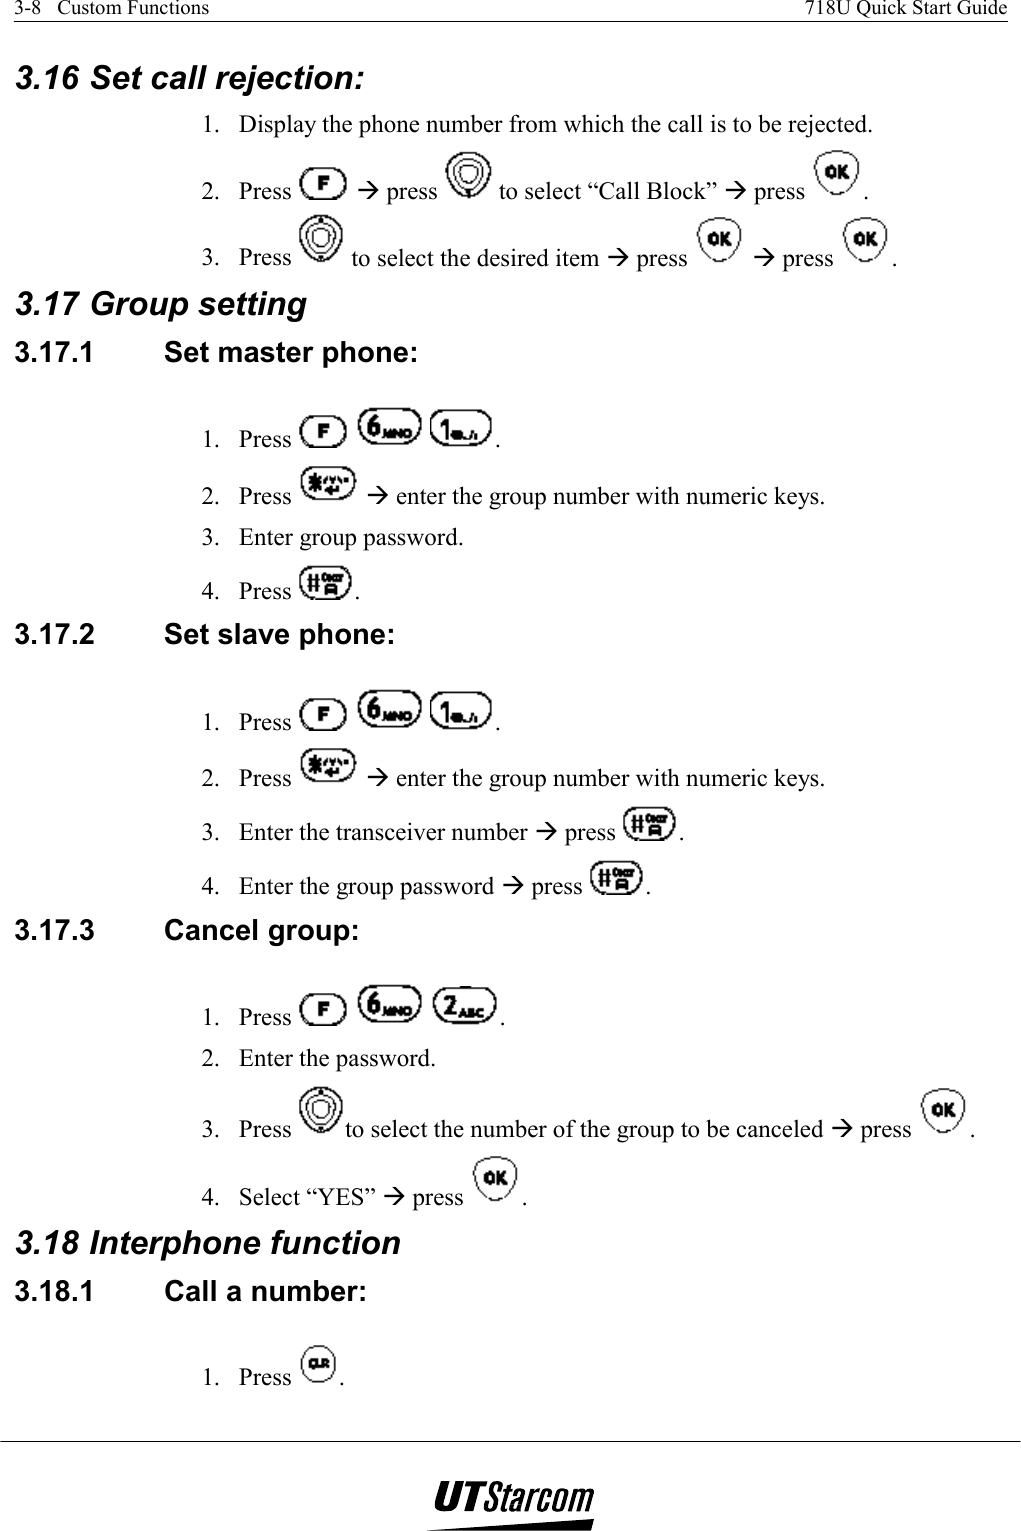 3-8   Custom Functions    718U Quick Start Guide   3.16 Set call rejection:  1.  Display the phone number from which the call is to be rejected. 2. Press   Æ press   to select “Call Block” Æ press  . 3. Press   to select the desired item Æ press   Æ press  . 3.17 Group setting 3.17.1  Set master phone: 1. Press      . 2. Press   Æ enter the group number with numeric keys. 3.  Enter group password. 4. Press  . 3.17.2  Set slave phone:  1. Press      . 2. Press   Æ enter the group number with numeric keys. 3.  Enter the transceiver number Æ press  . 4.  Enter the group password Æ press  . 3.17.3  Cancel group:  1. Press      . 2.  Enter the password. 3. Press  to select the number of the group to be canceled Æ press  . 4. Select “YES” Æ press  . 3.18 Interphone function 3.18.1  Call a number:  1. Press  . 